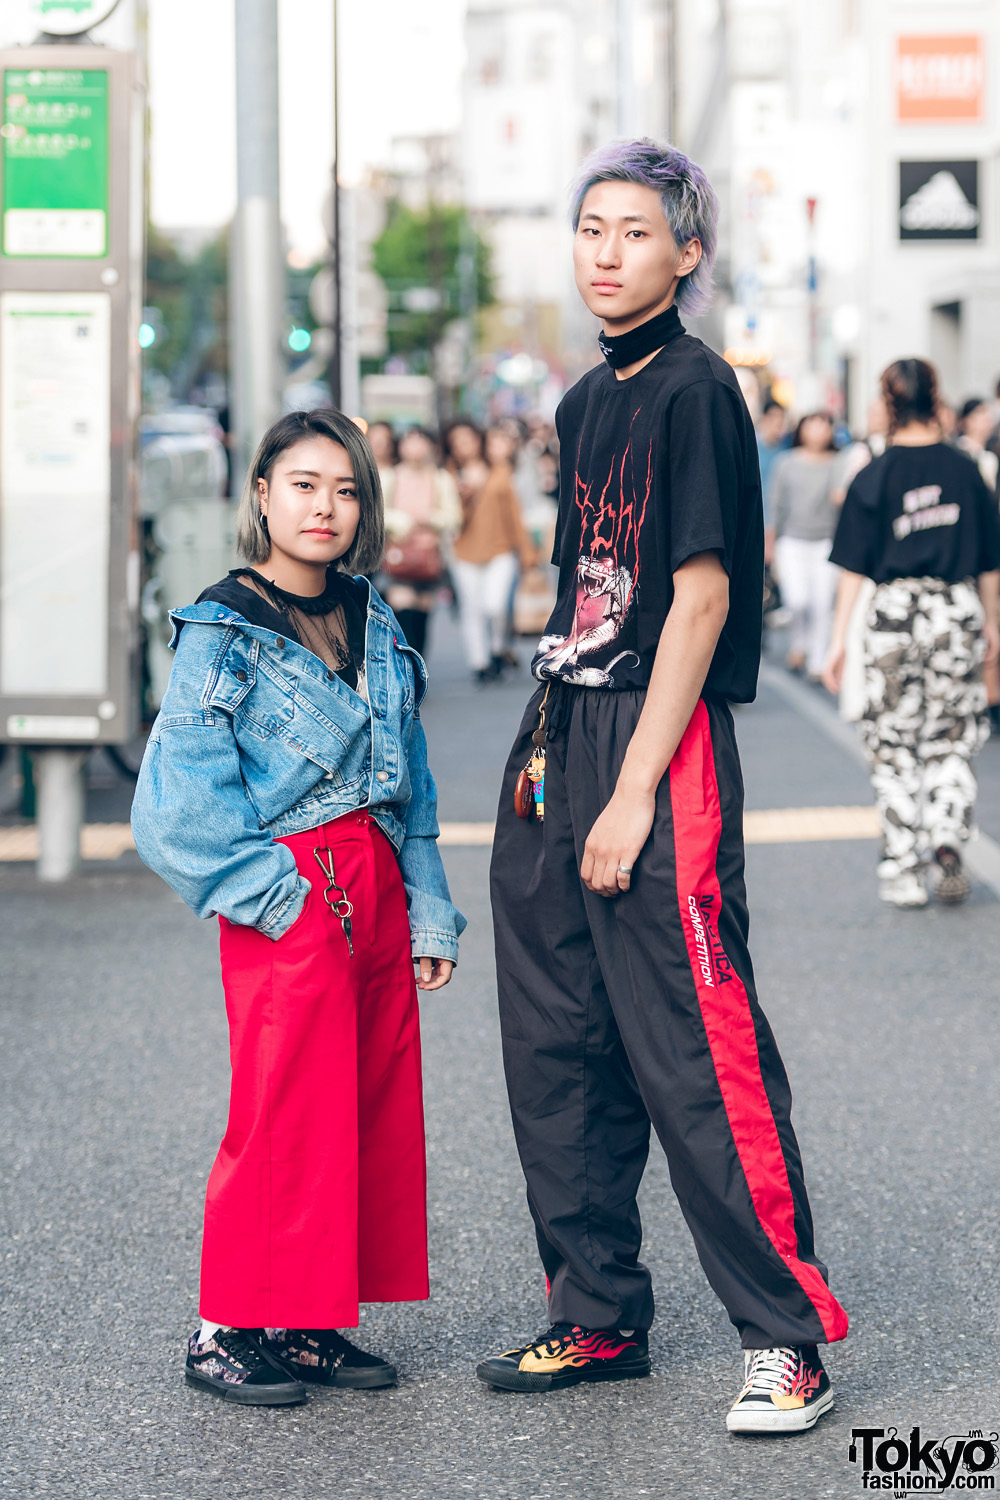 Harajuku Duo in Black-and-Red Streetwear w/ Levi’s, RNA, Sarcastic & Co., Vans, MISBHV, Nautica & Converse